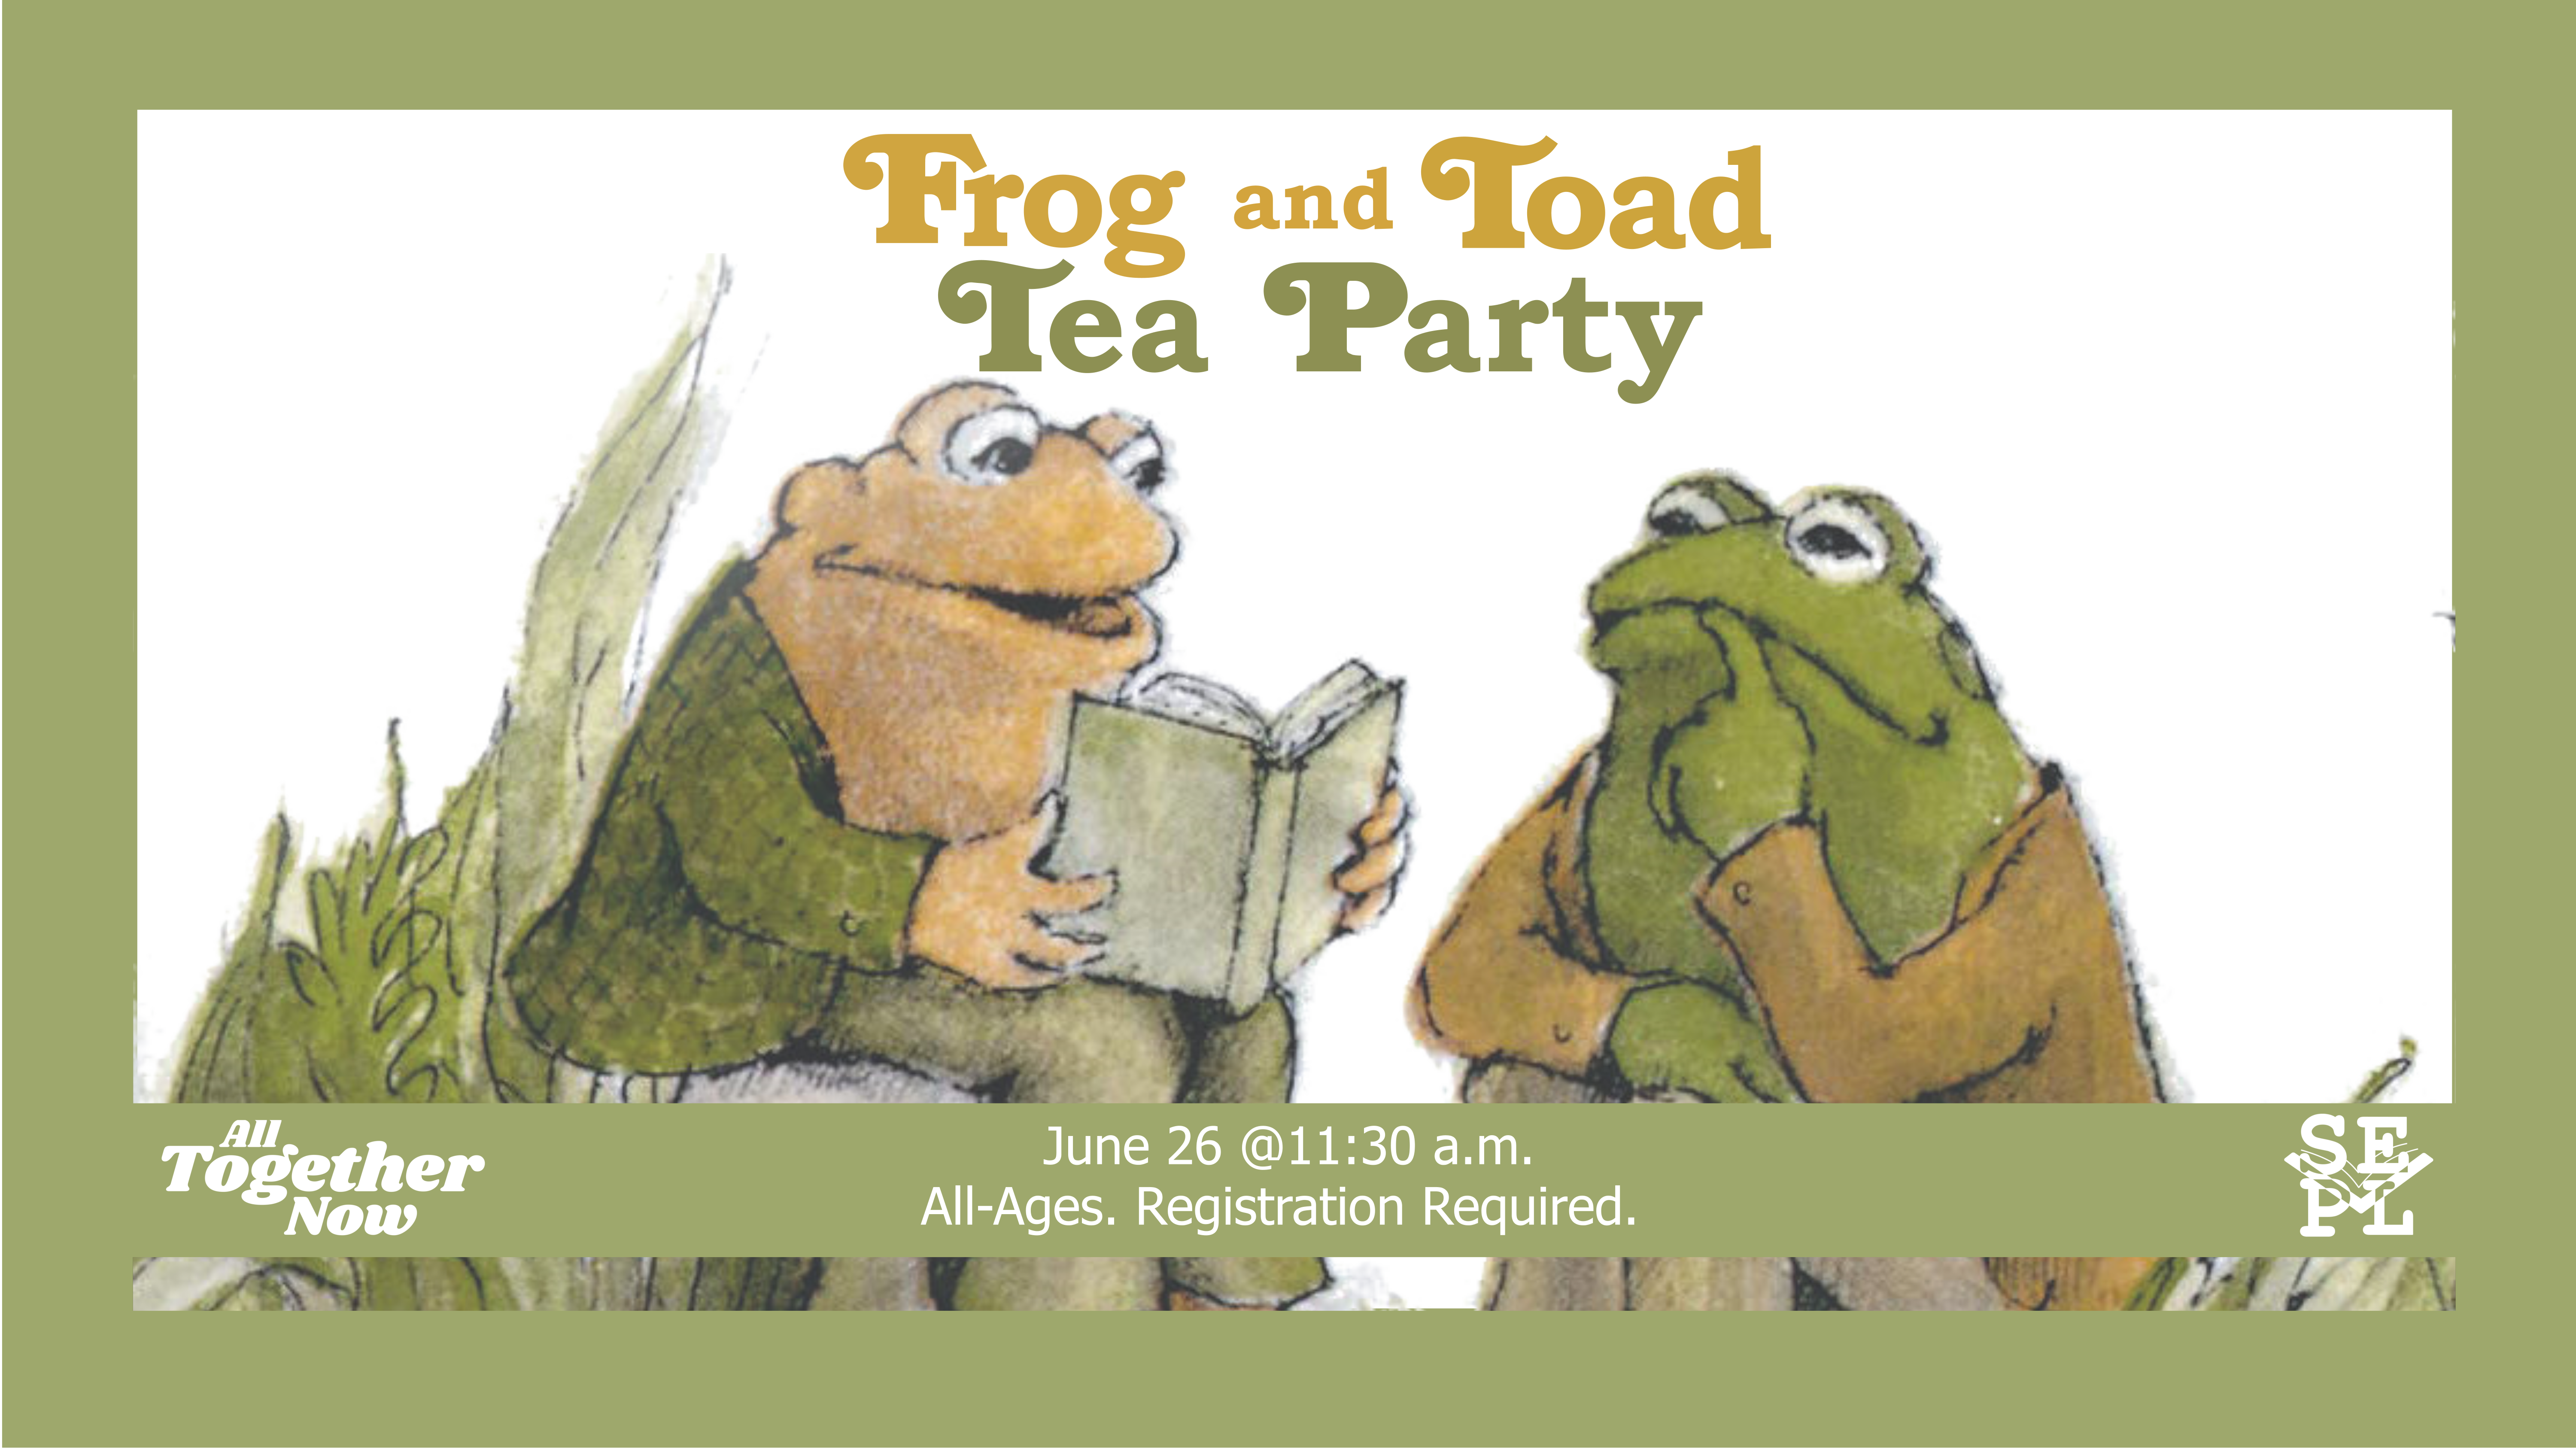 Frog and Toad Tea Party